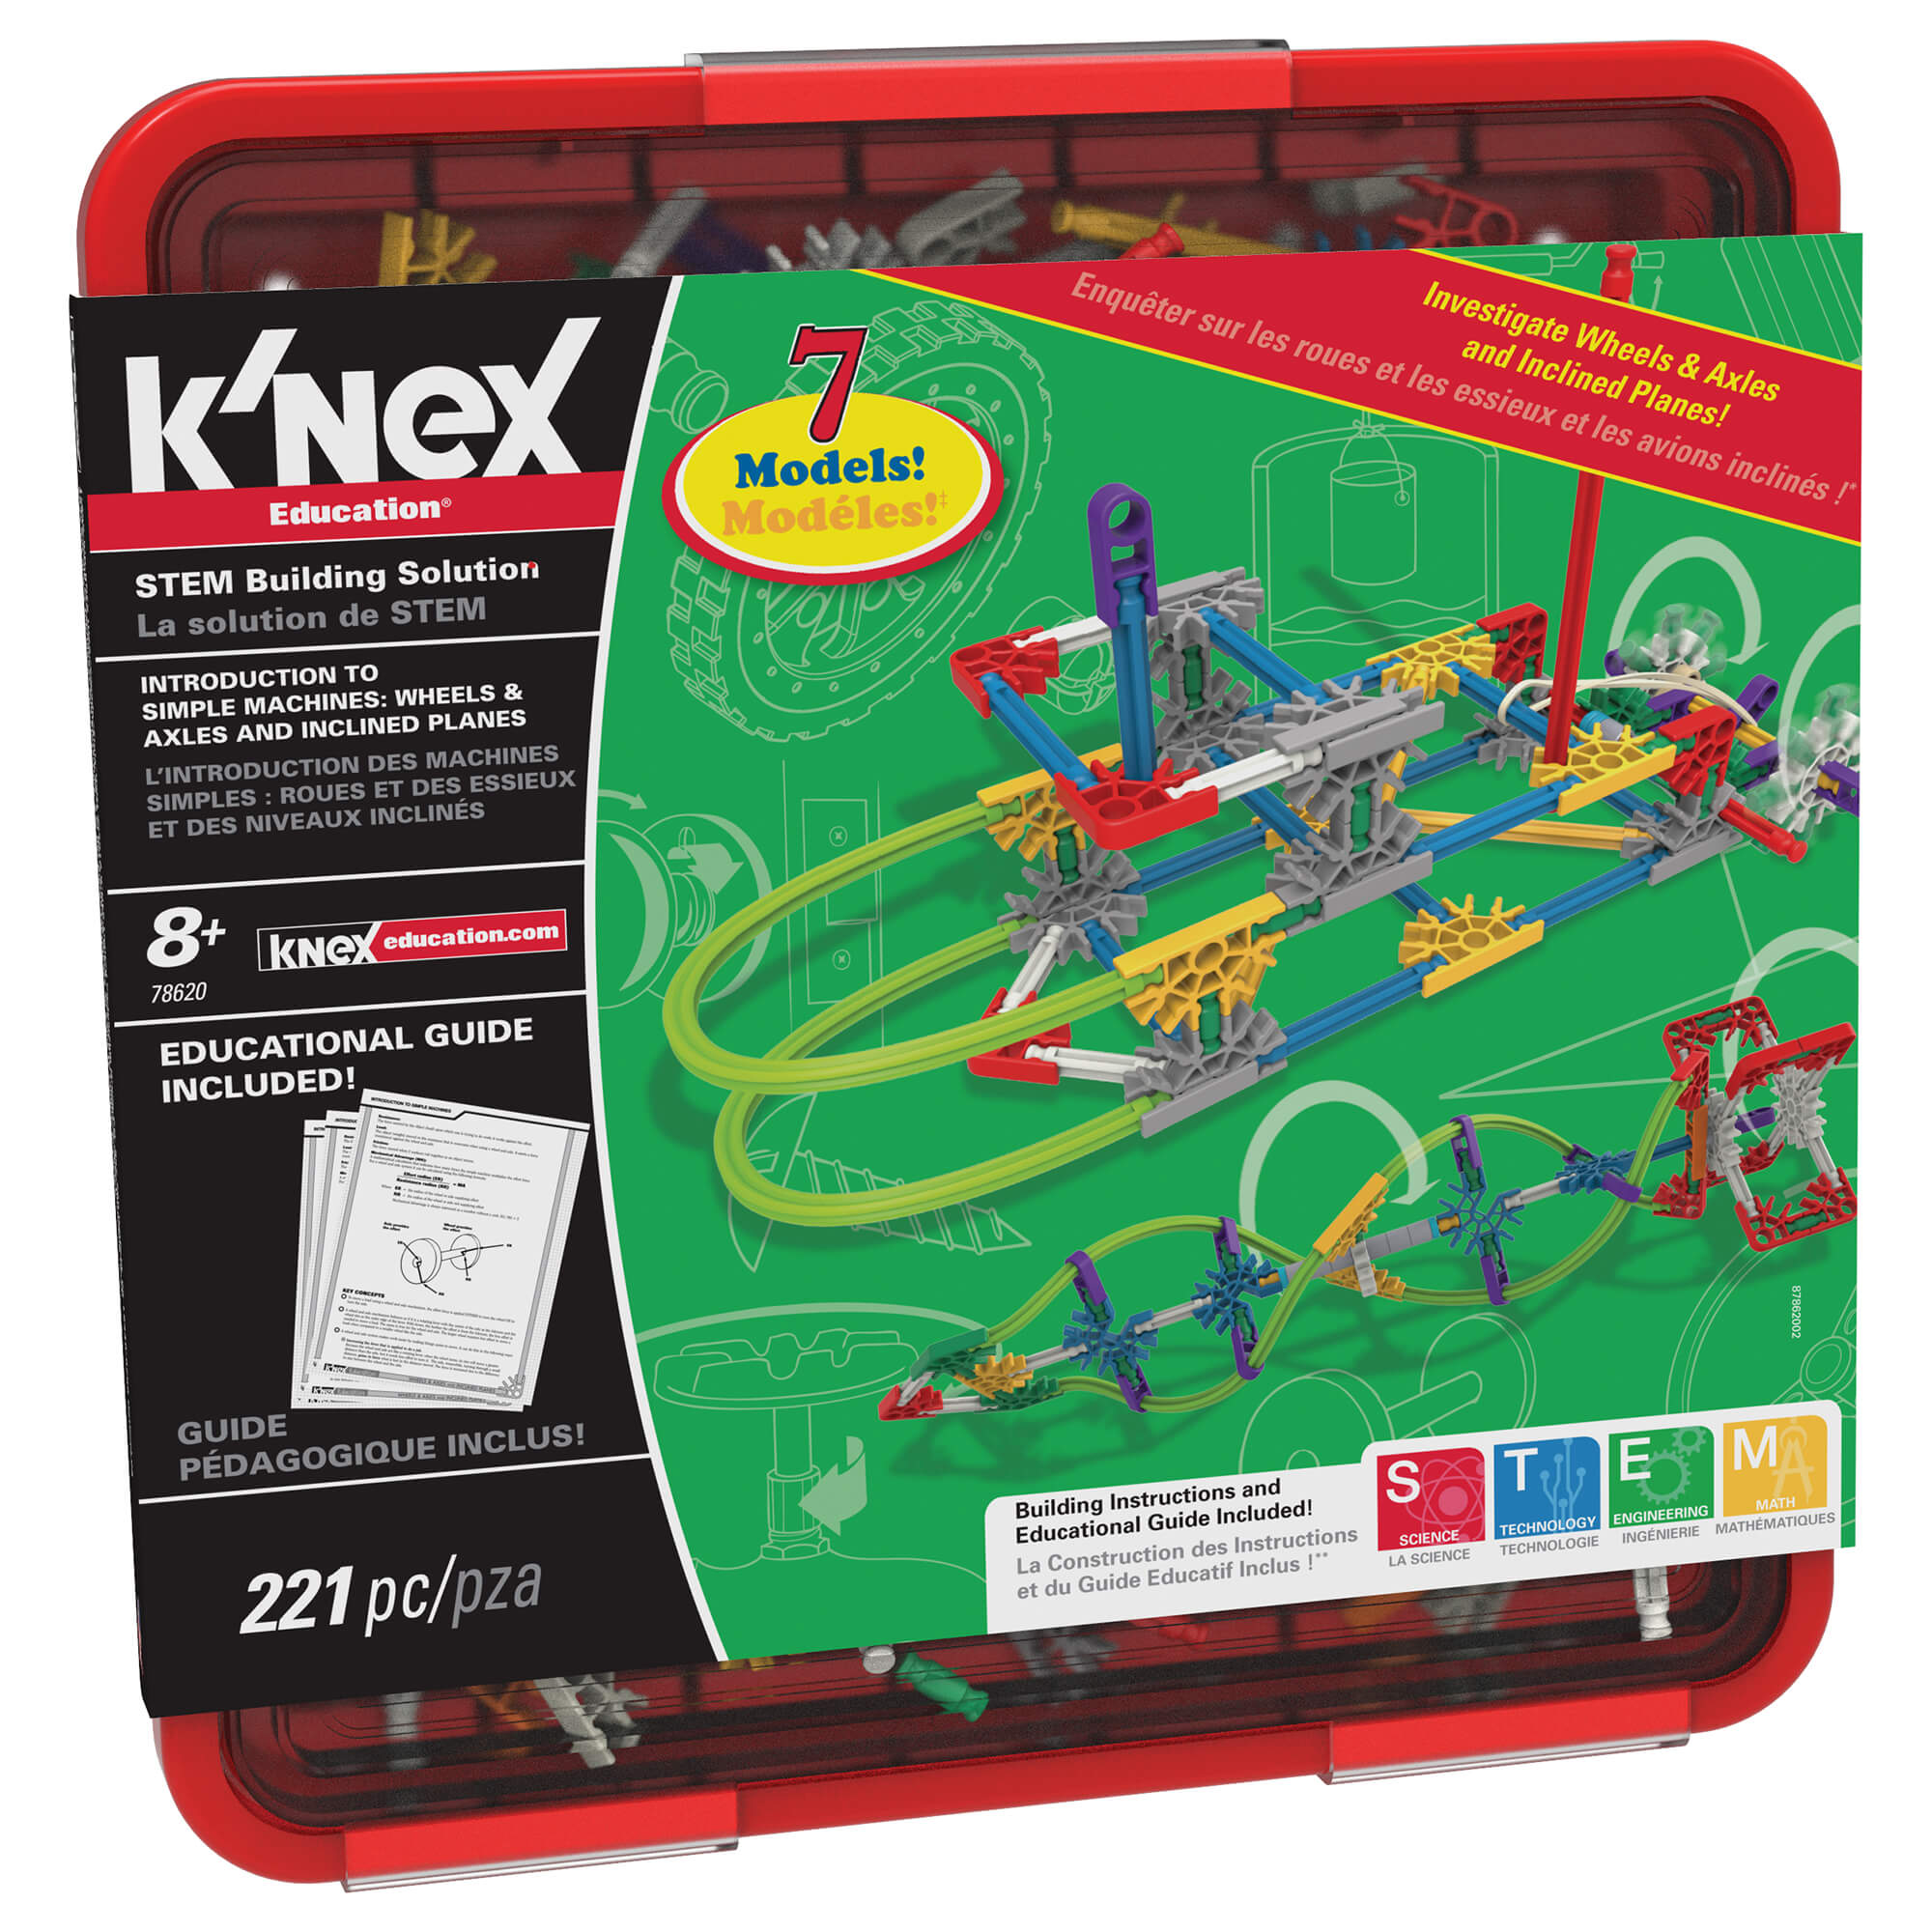 K'NEX Education Introduction to Simple Machines: Wheels, Axles, & Inclined Planes